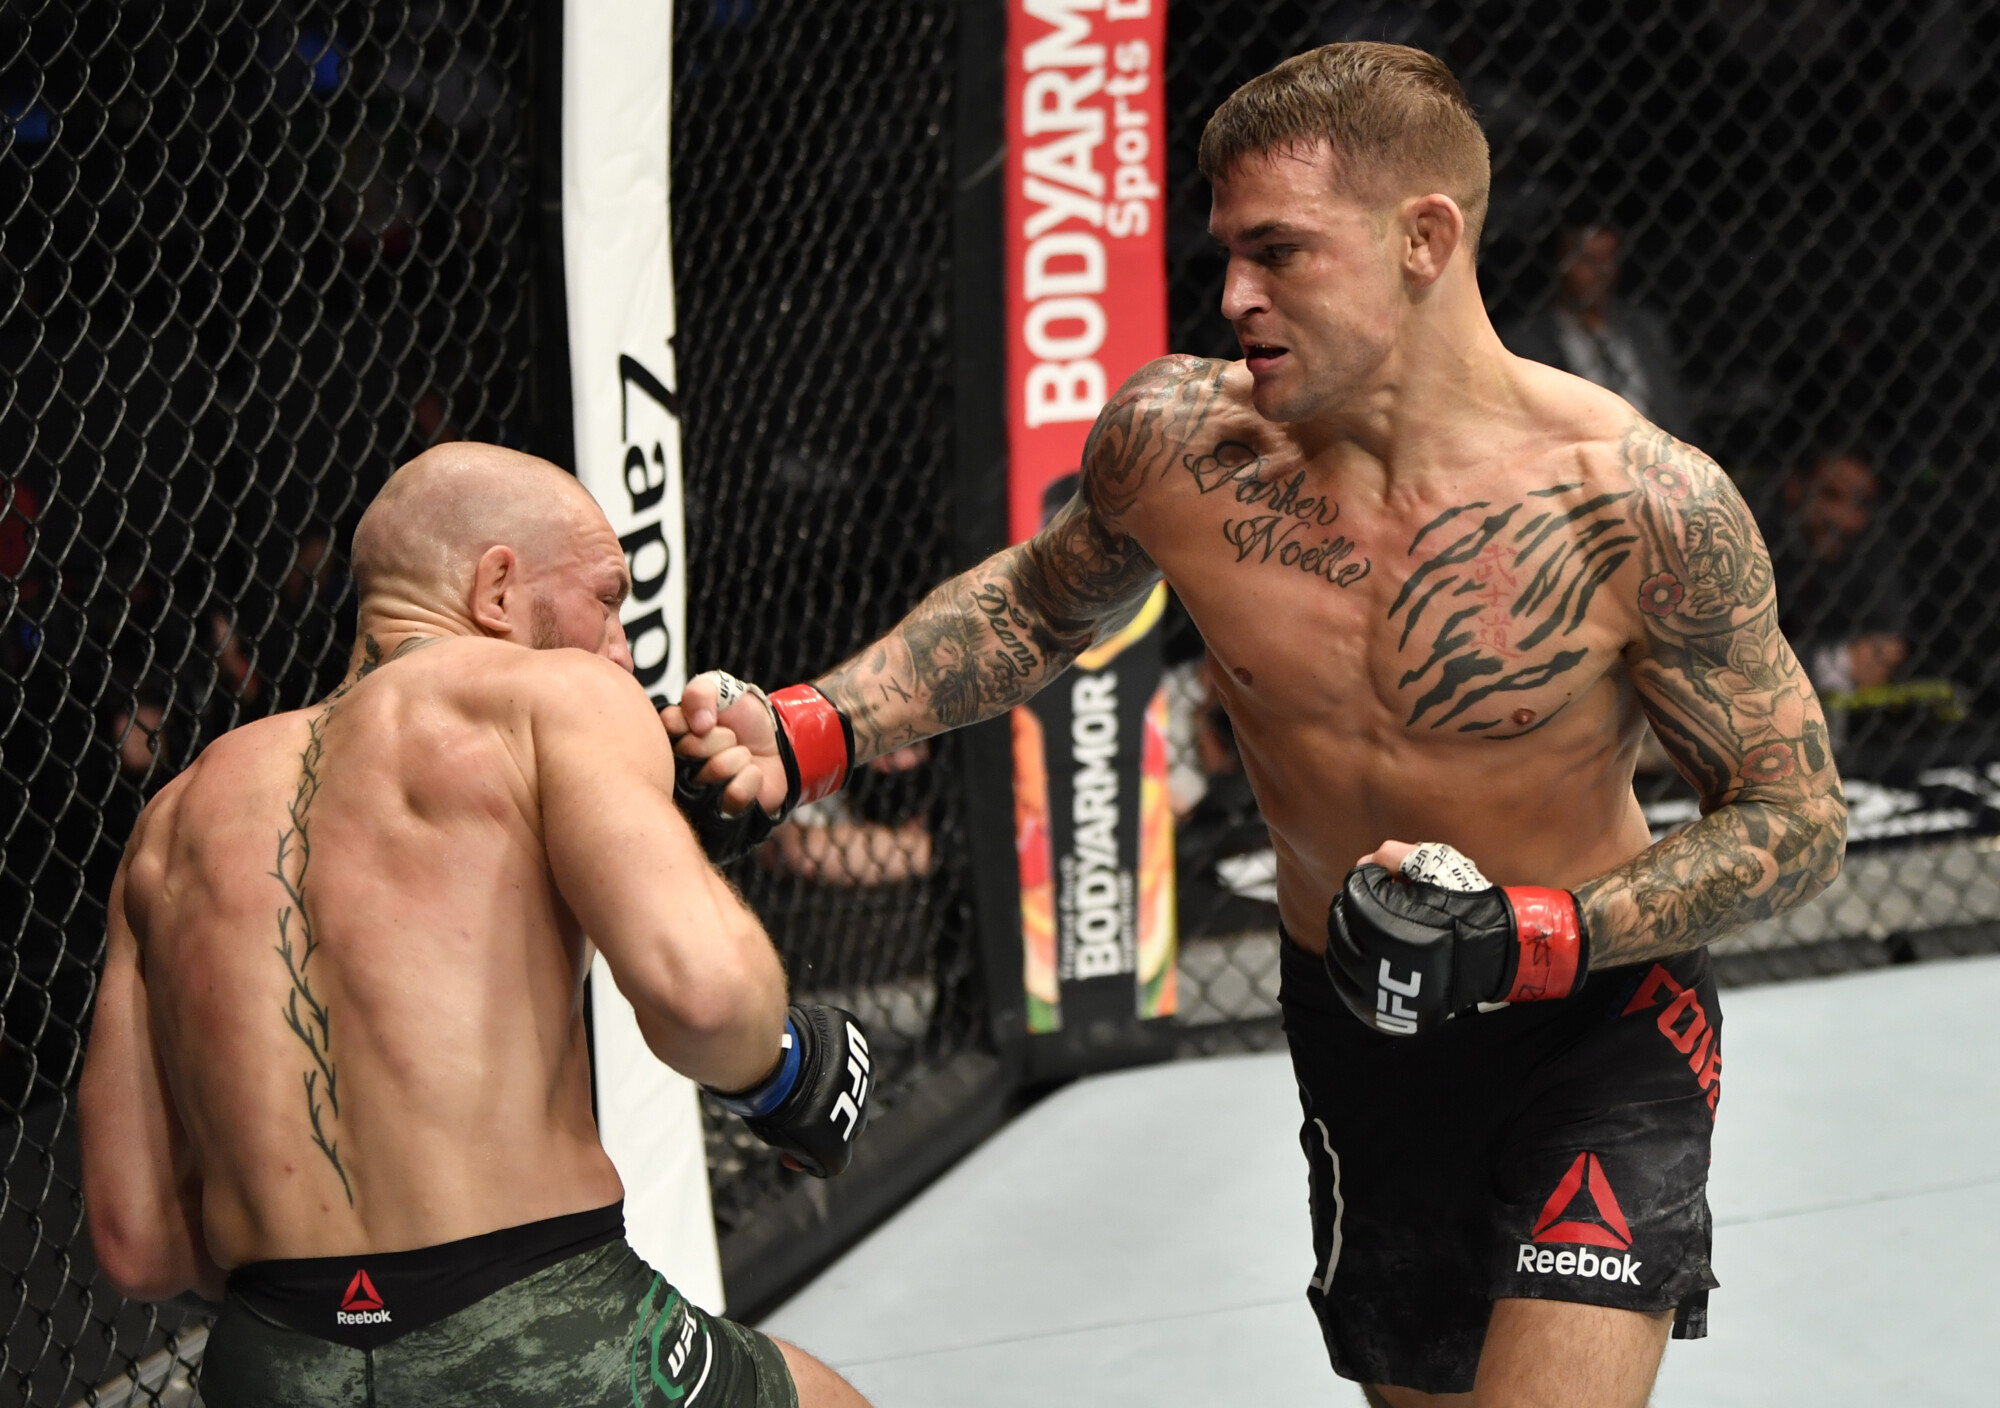 Poirier Knocks out Conor McGregor in 2nd Round at UFC 257